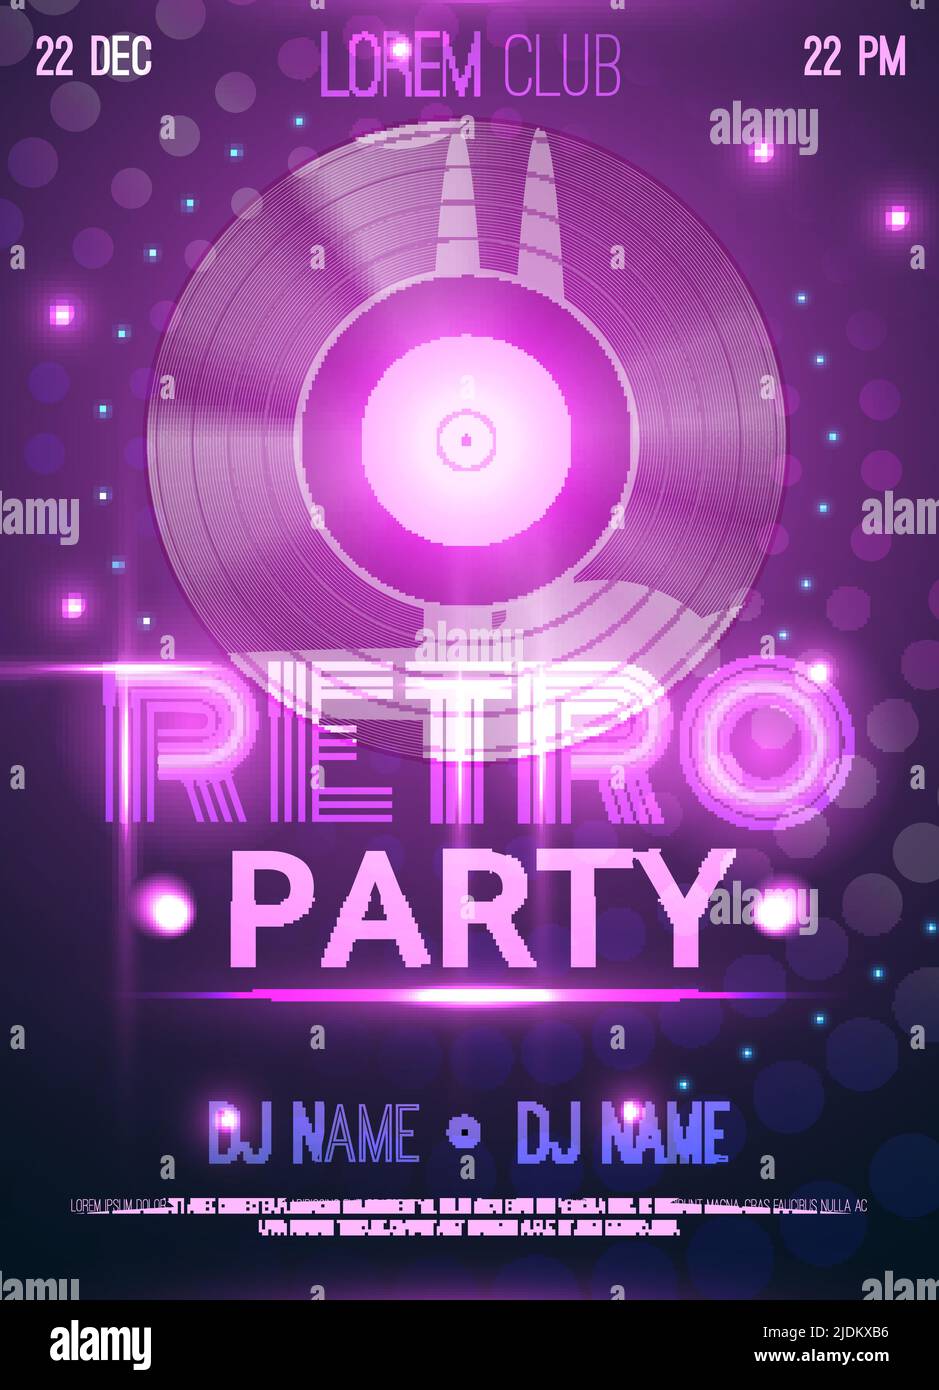 Retro party club announcement invitation  poster with realistic vinyl record disc glowing purple lights background vector illustration Stock Vector